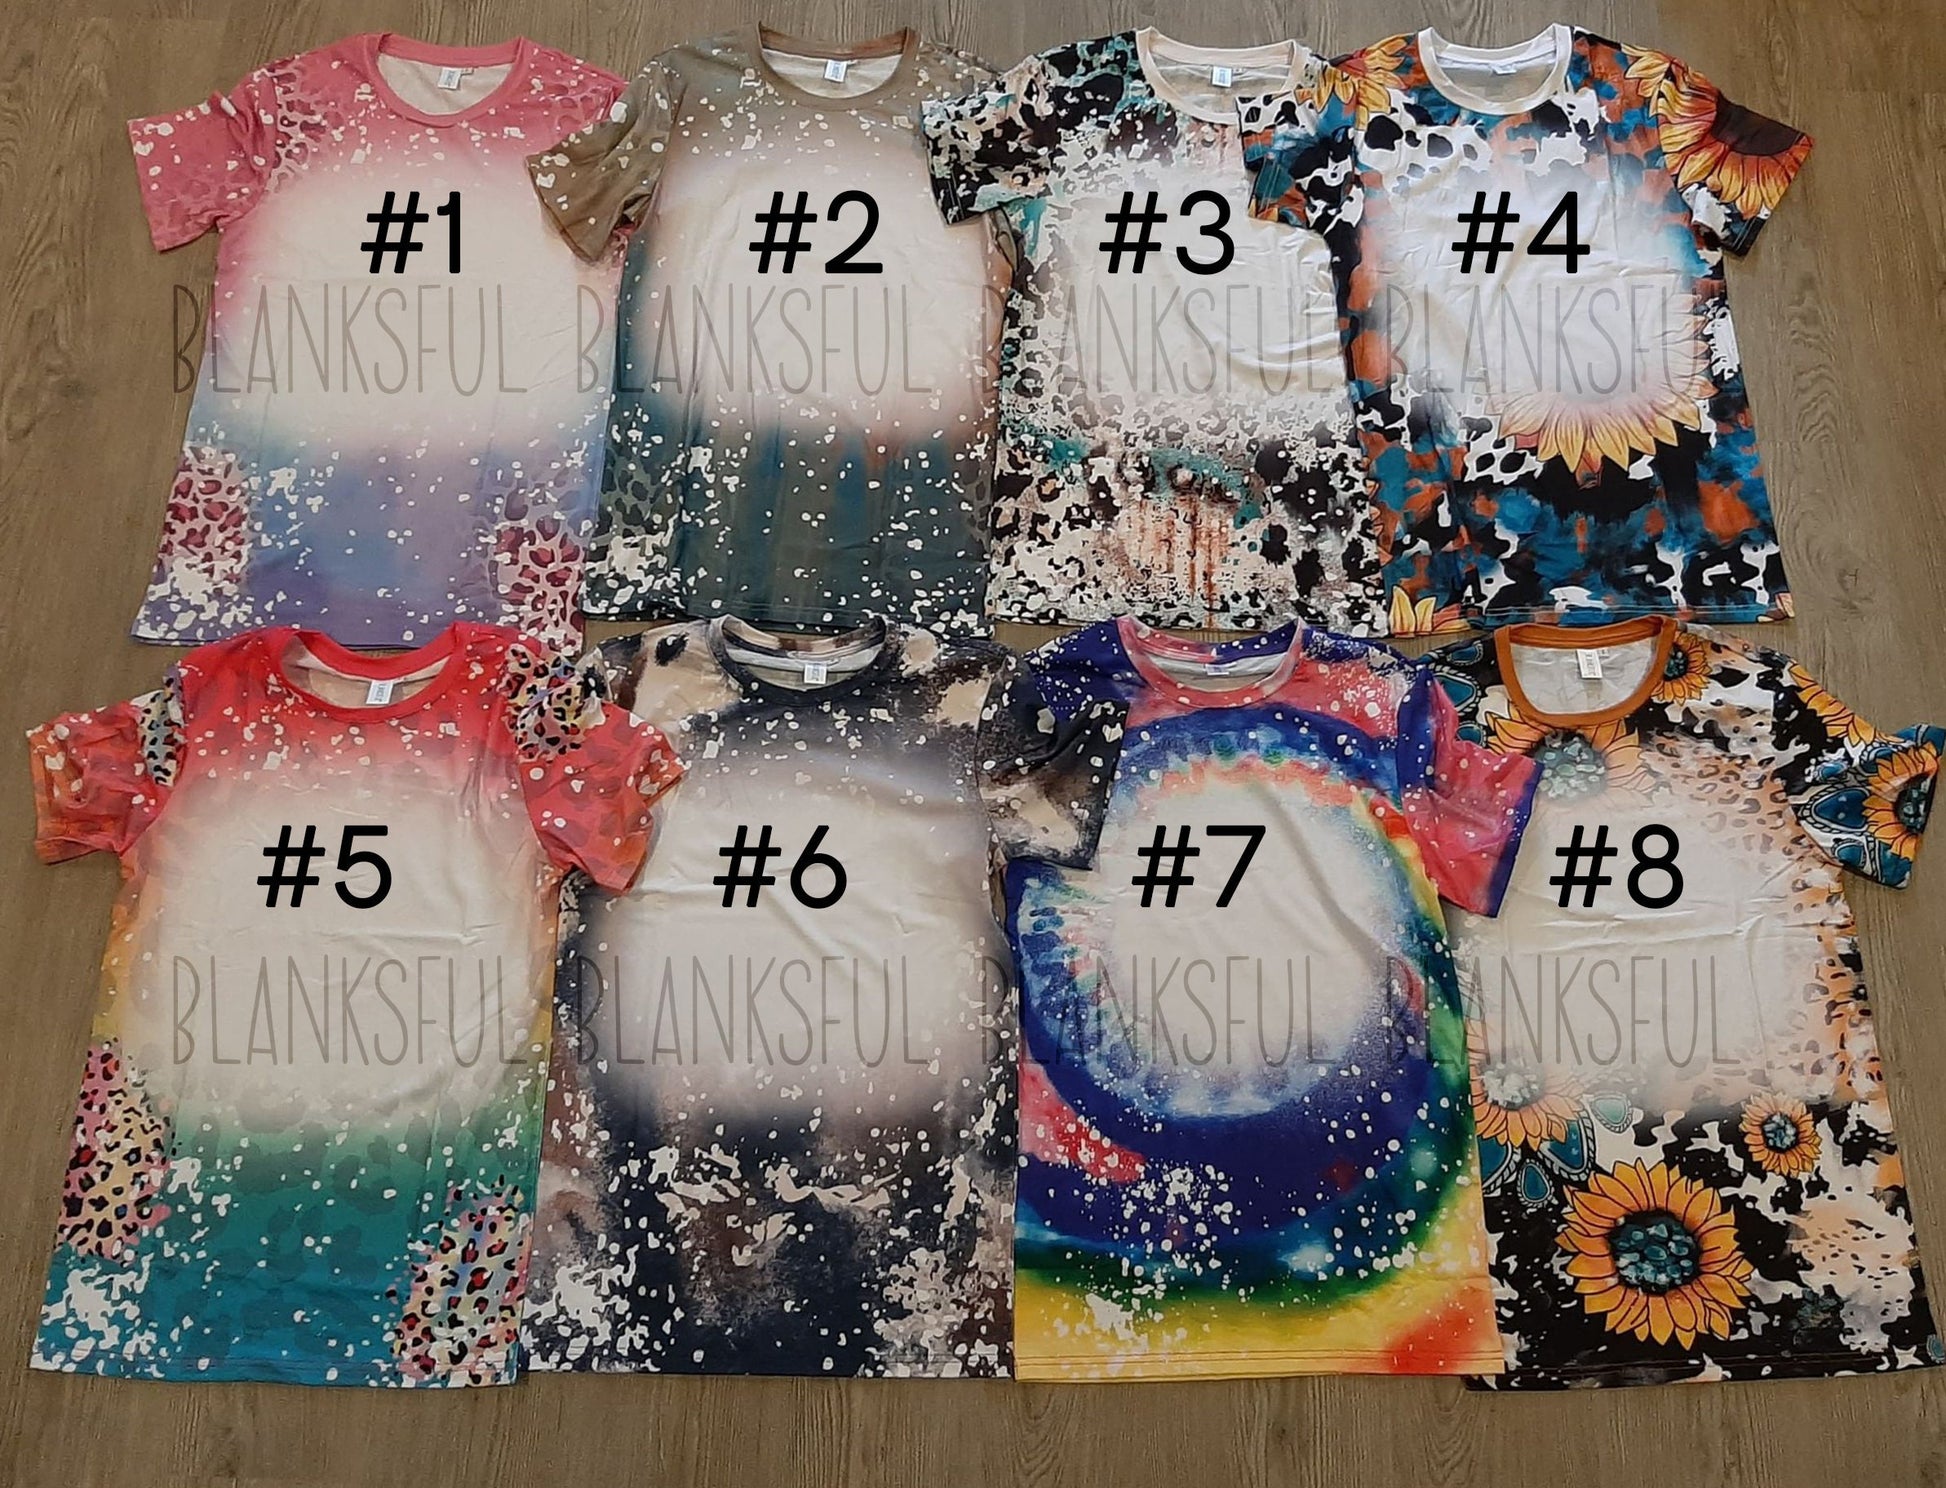 Youth Tie Dye Bleach T-shirt Sublimation Blank